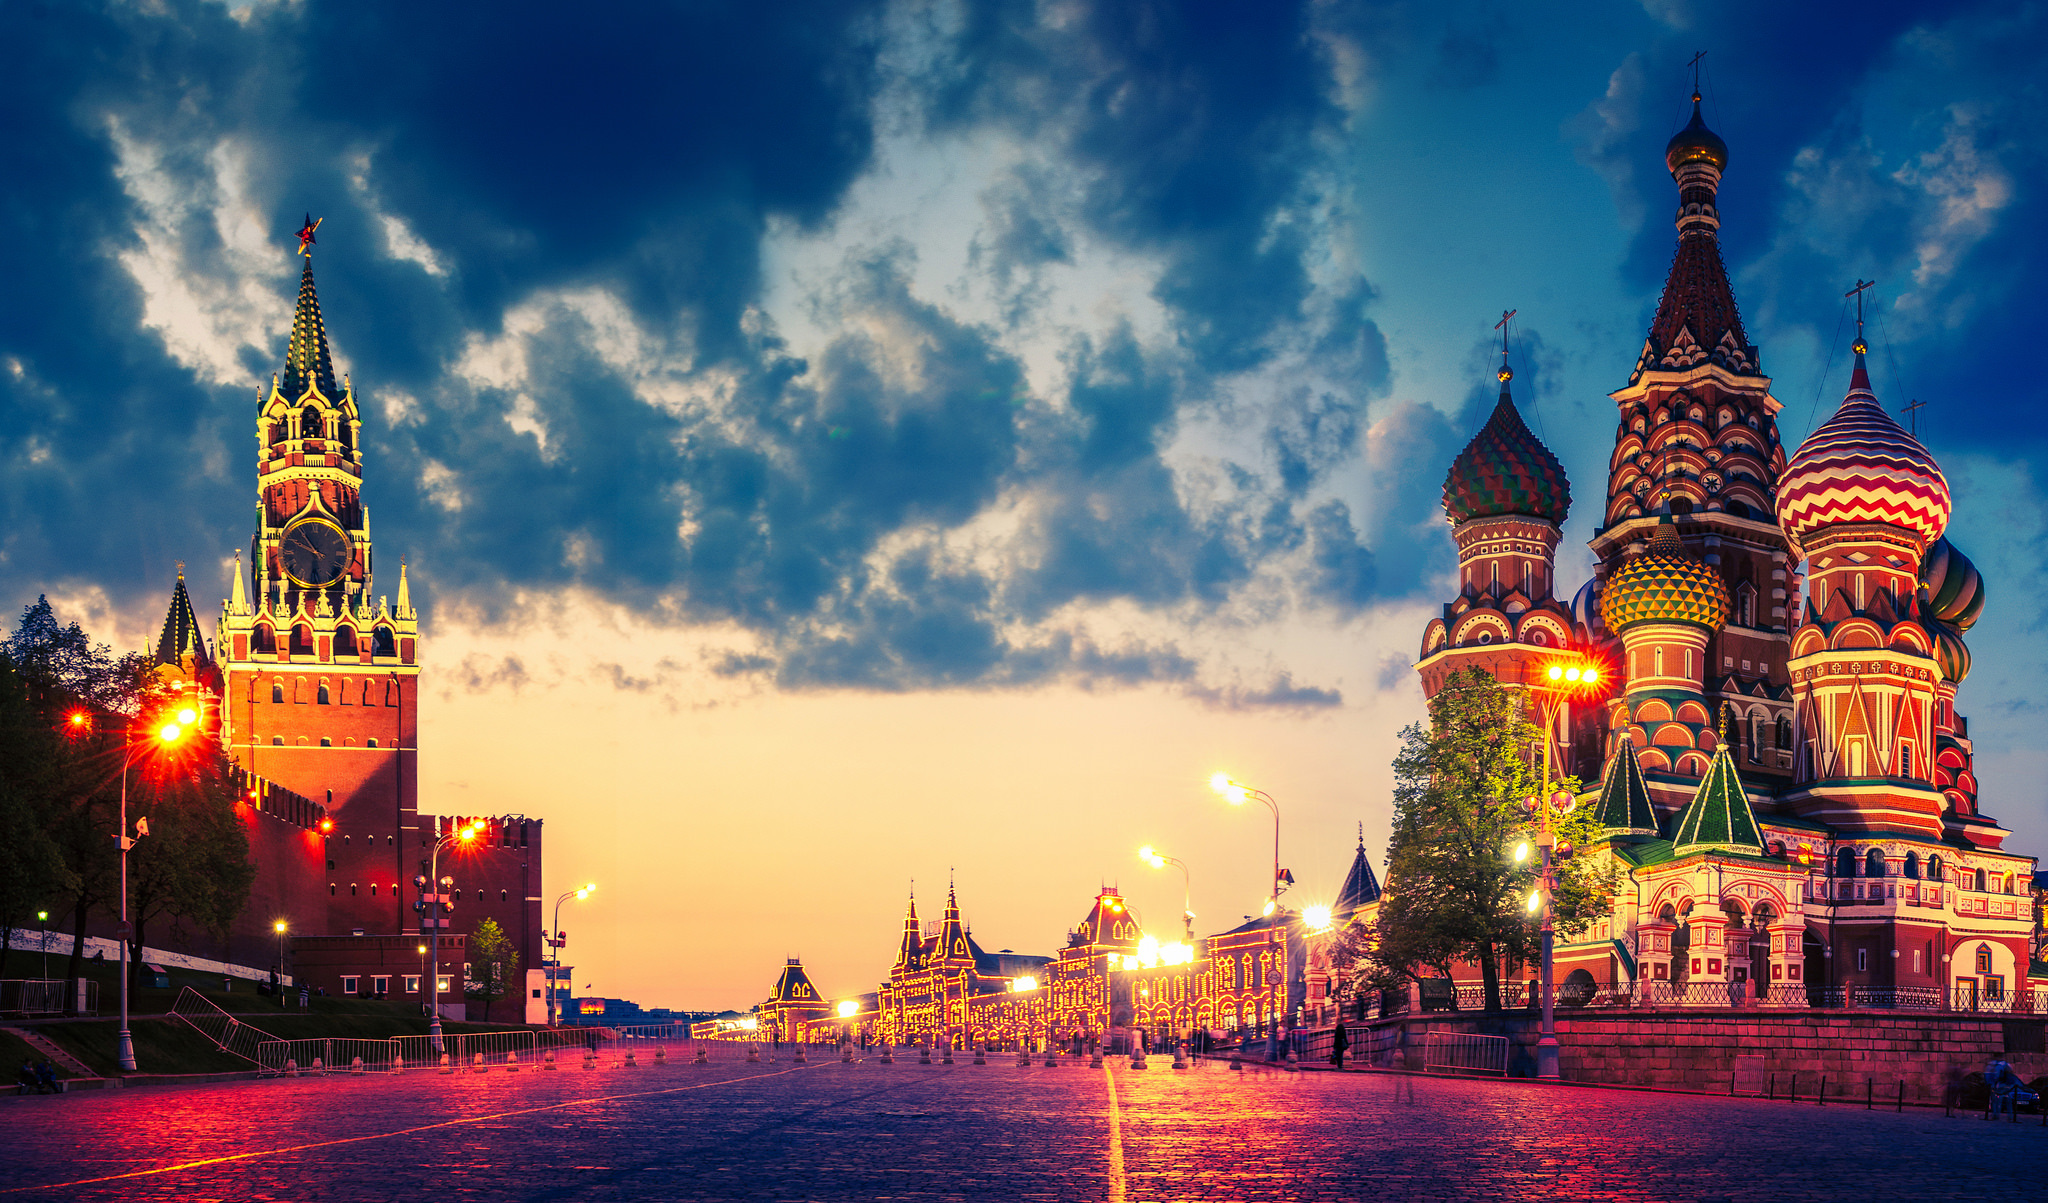 Beautifull Red Square in Moscow at night, one of most beauitifull picture of moscow for me.